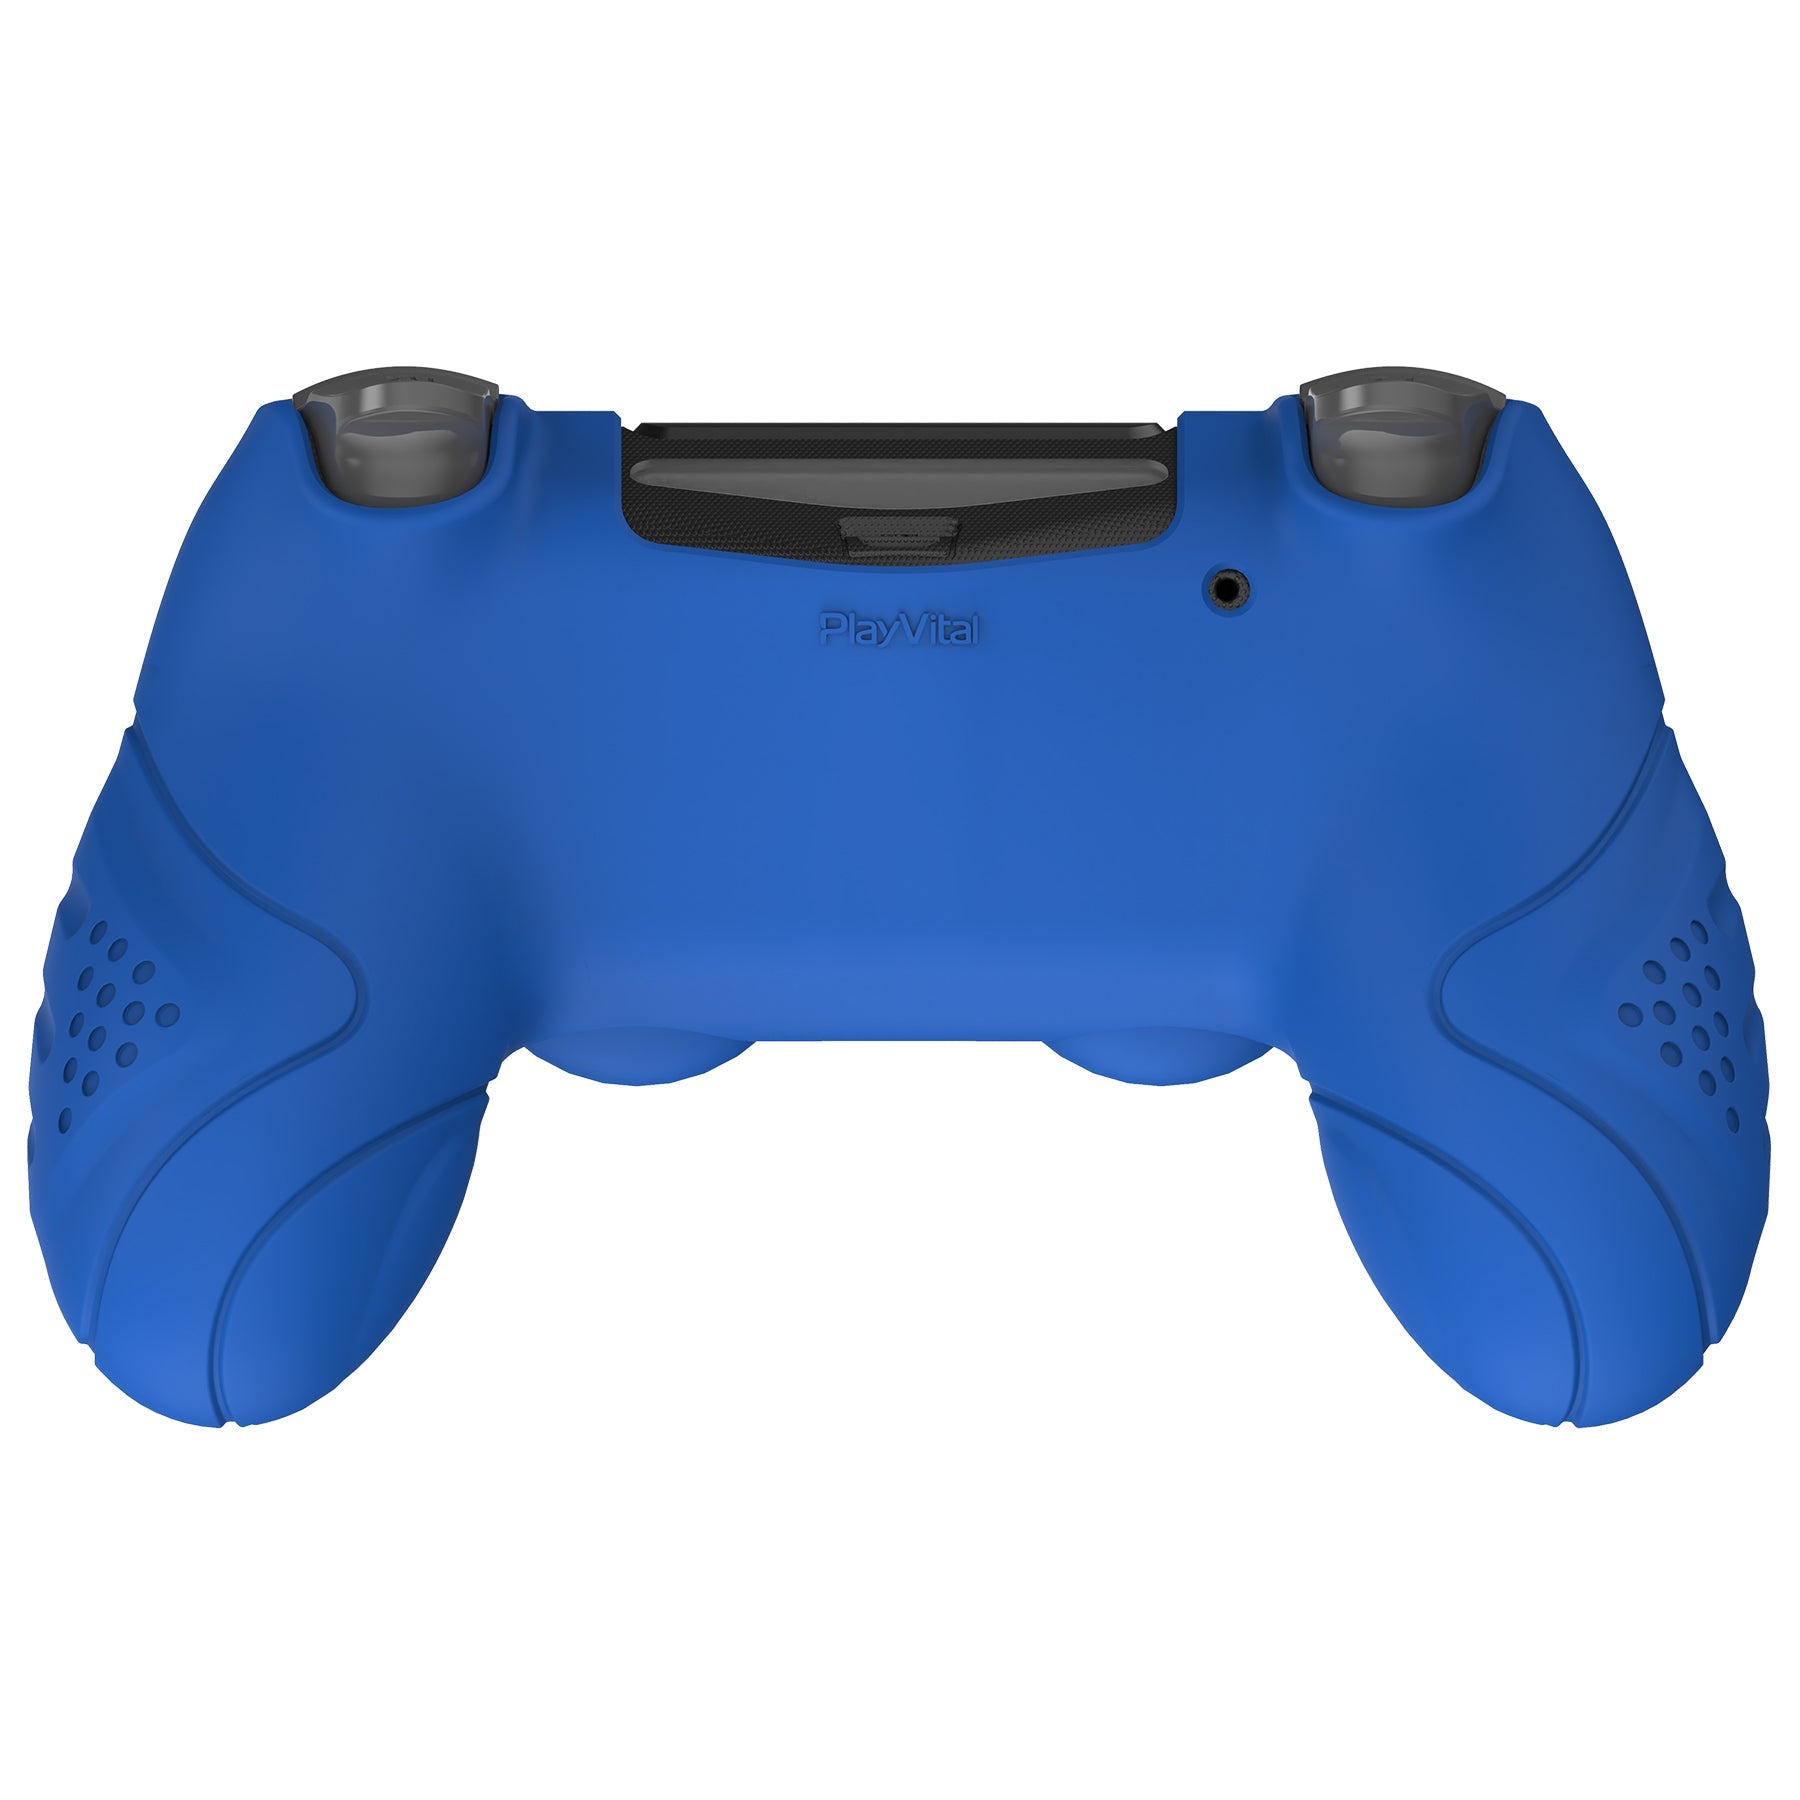 PlayVital Guardian Edition Blue Ergonomic Soft Anti-Slip Controller Silicone Case Cover for PS4, Rubber Protector Skins with black Joystick Caps for PS4 Slim PS4 Pro Controller - P4CC0064 playvital